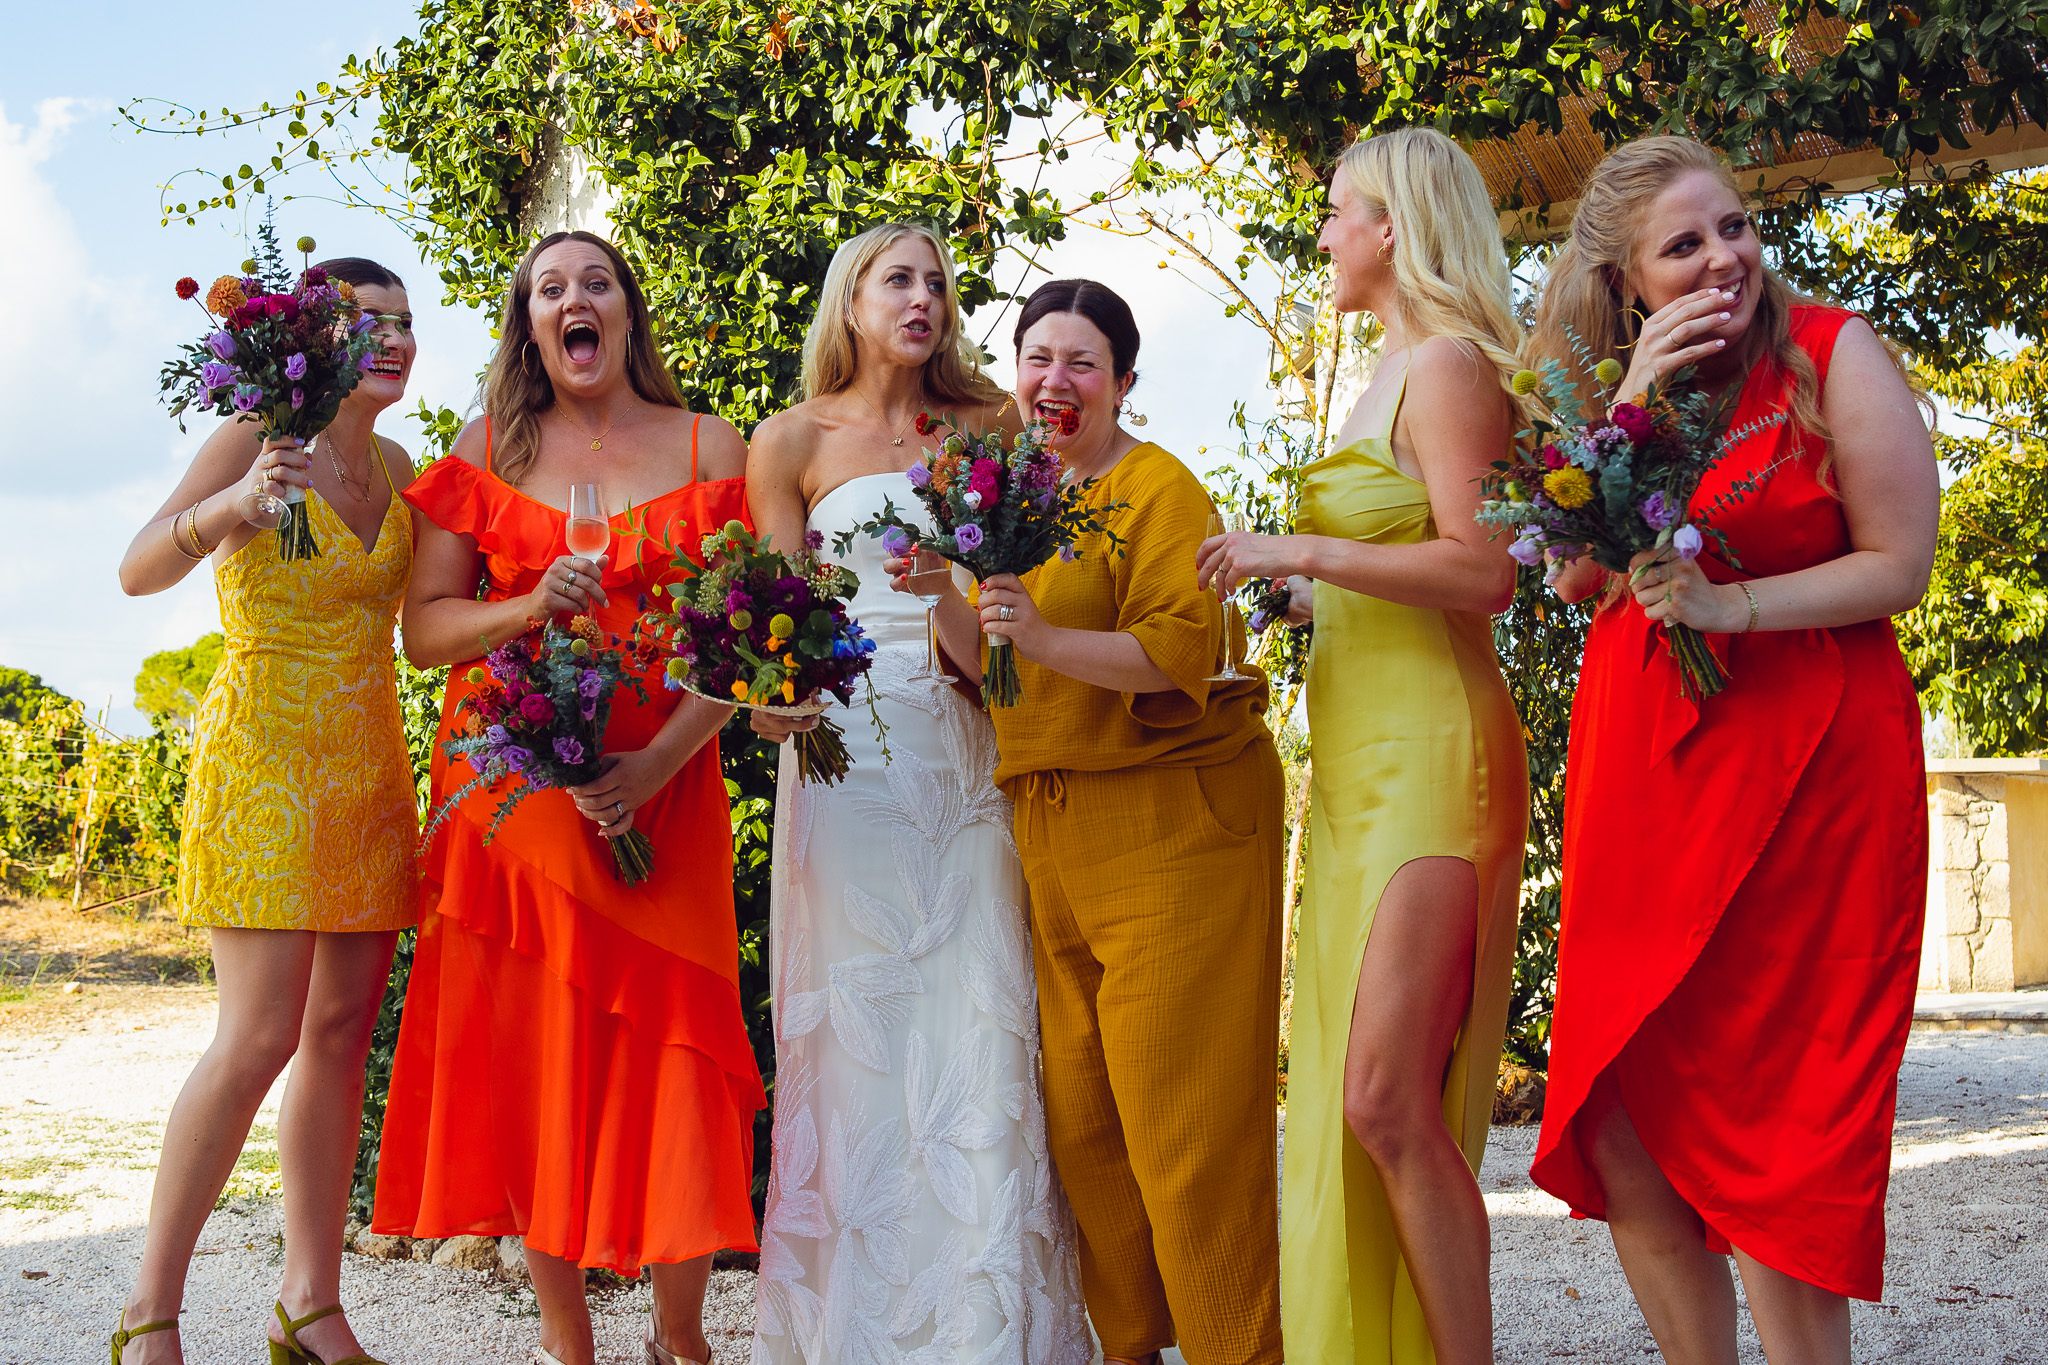 The bride and five brightly dressed bridesmaids stand together laughing whilst they pose for a group shot